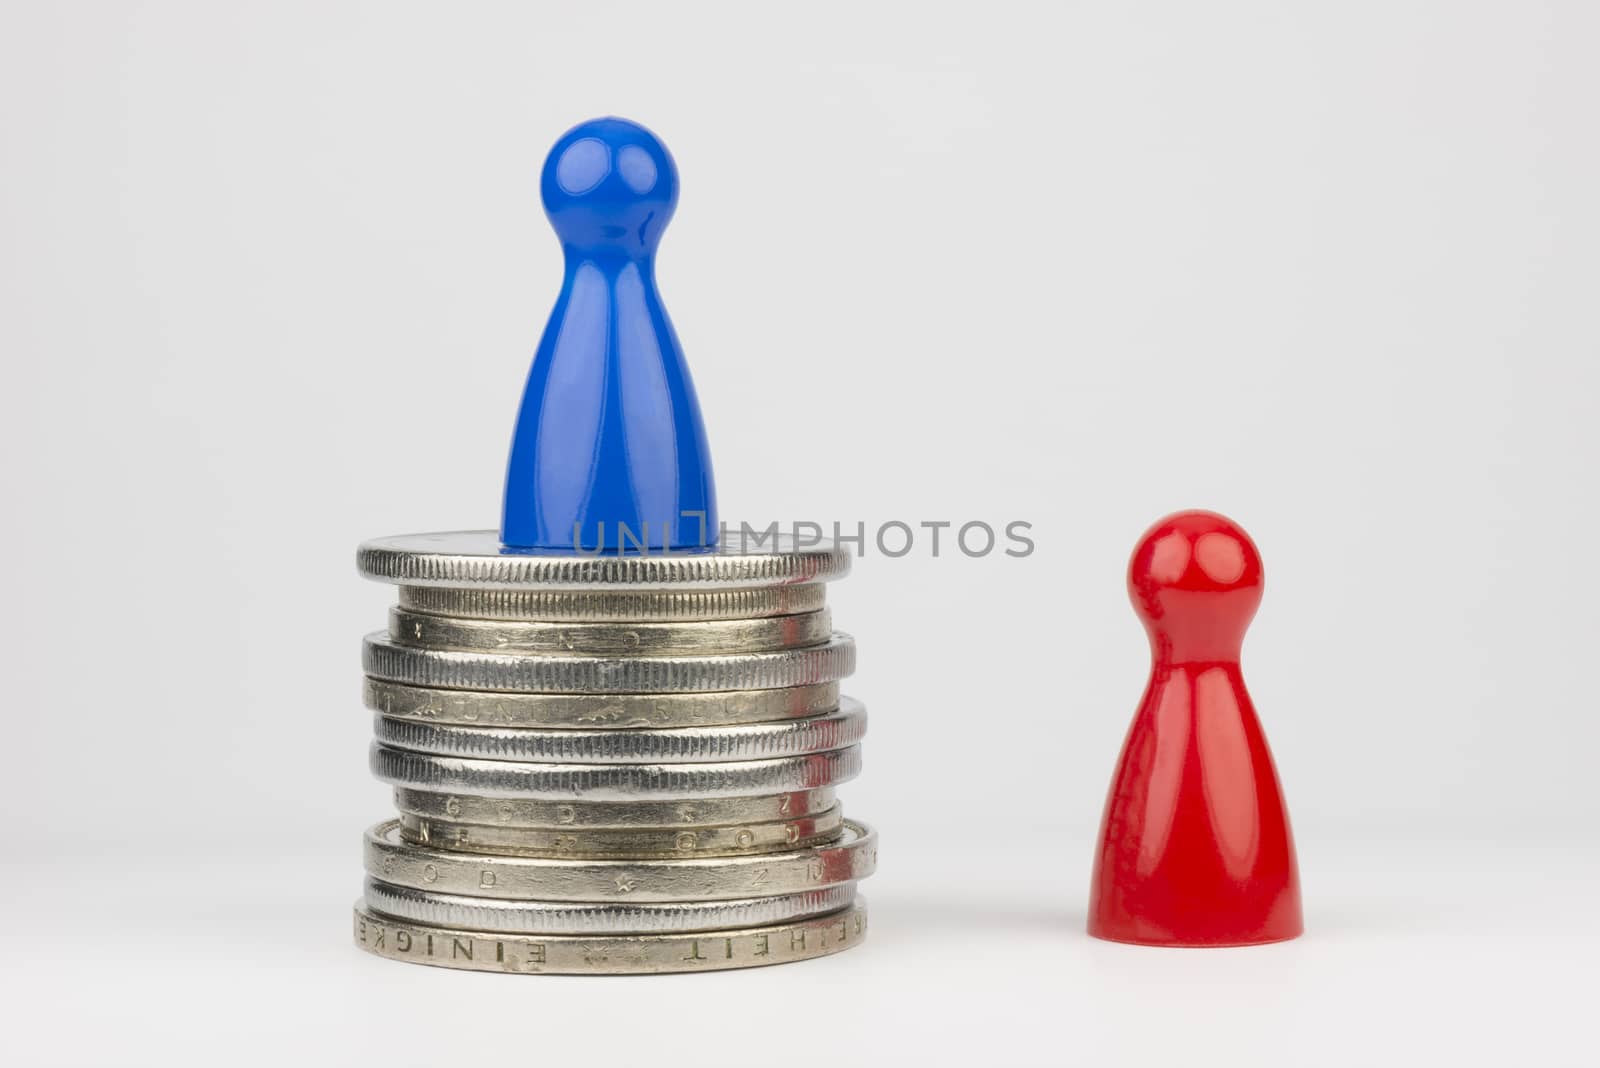 Conceptual financial position represented with colored play pieces and coins
